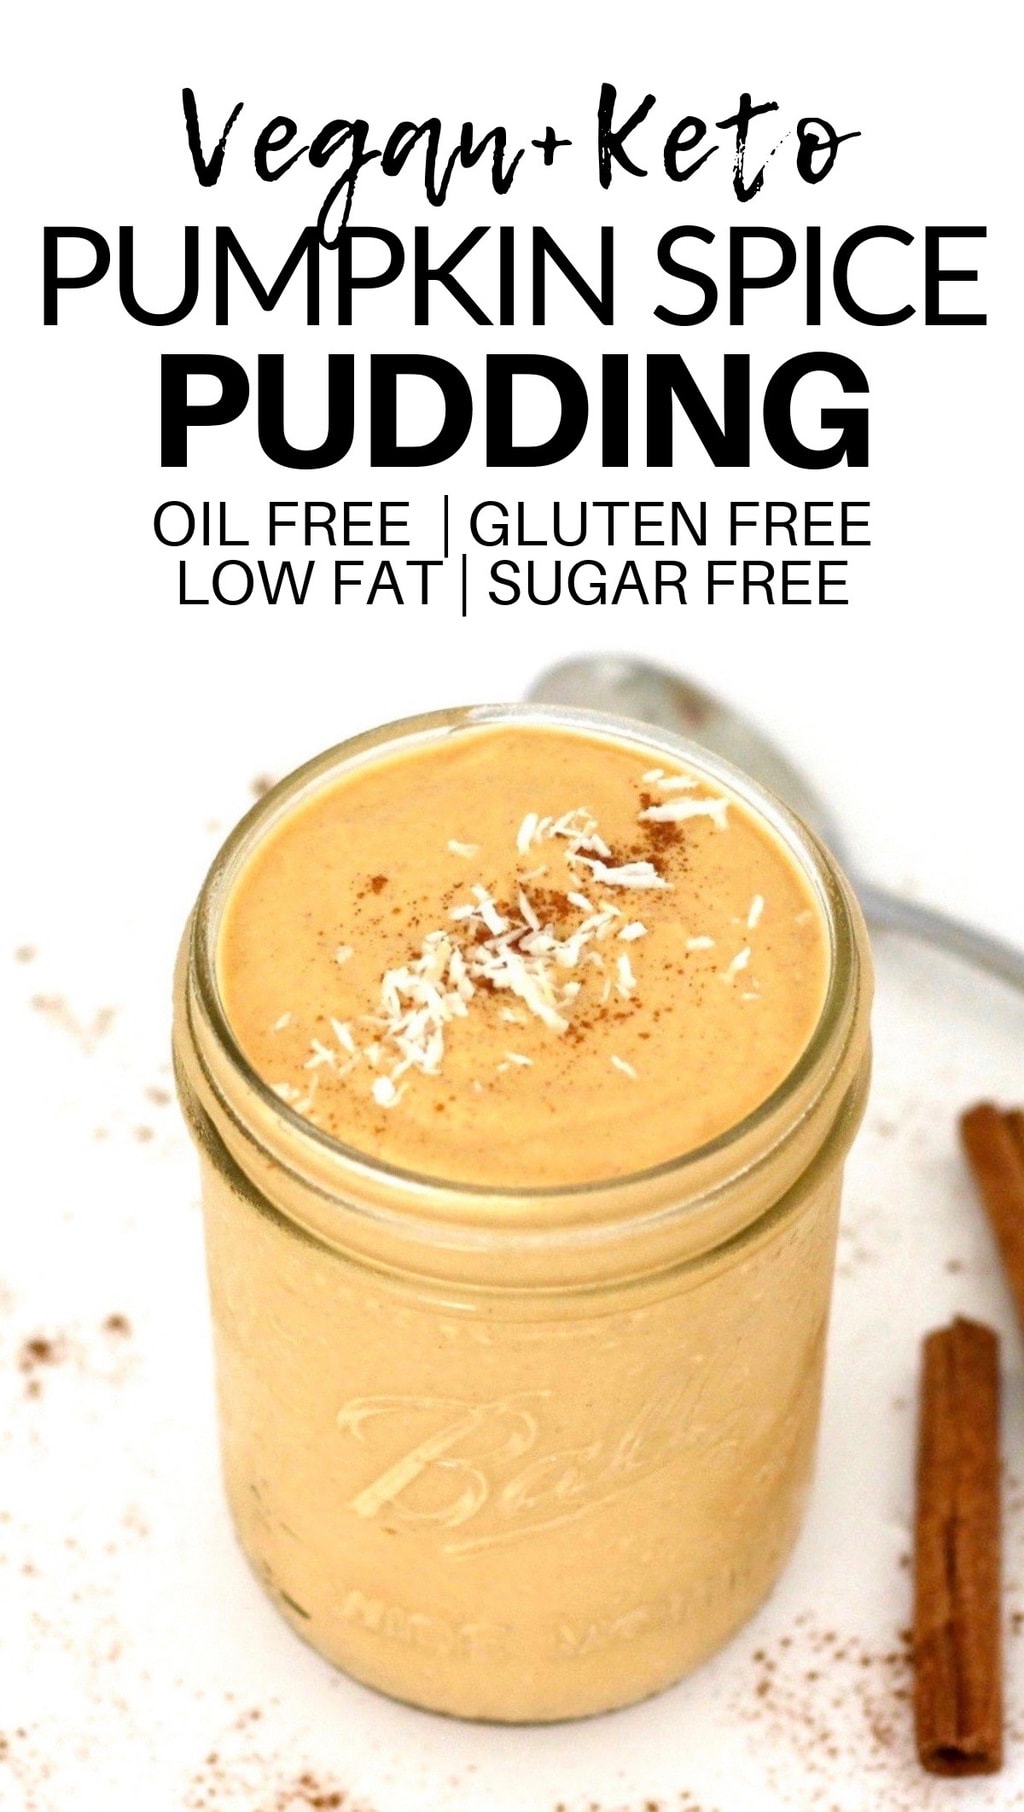 This Vegan Pumpkin Spice Pudding is totally delicious, but super healthy for you! It is rich and creamy and perfectly sweet. It's low-carb, keto, vegan, gluten-free, low-calorie, and contains no added sugar.